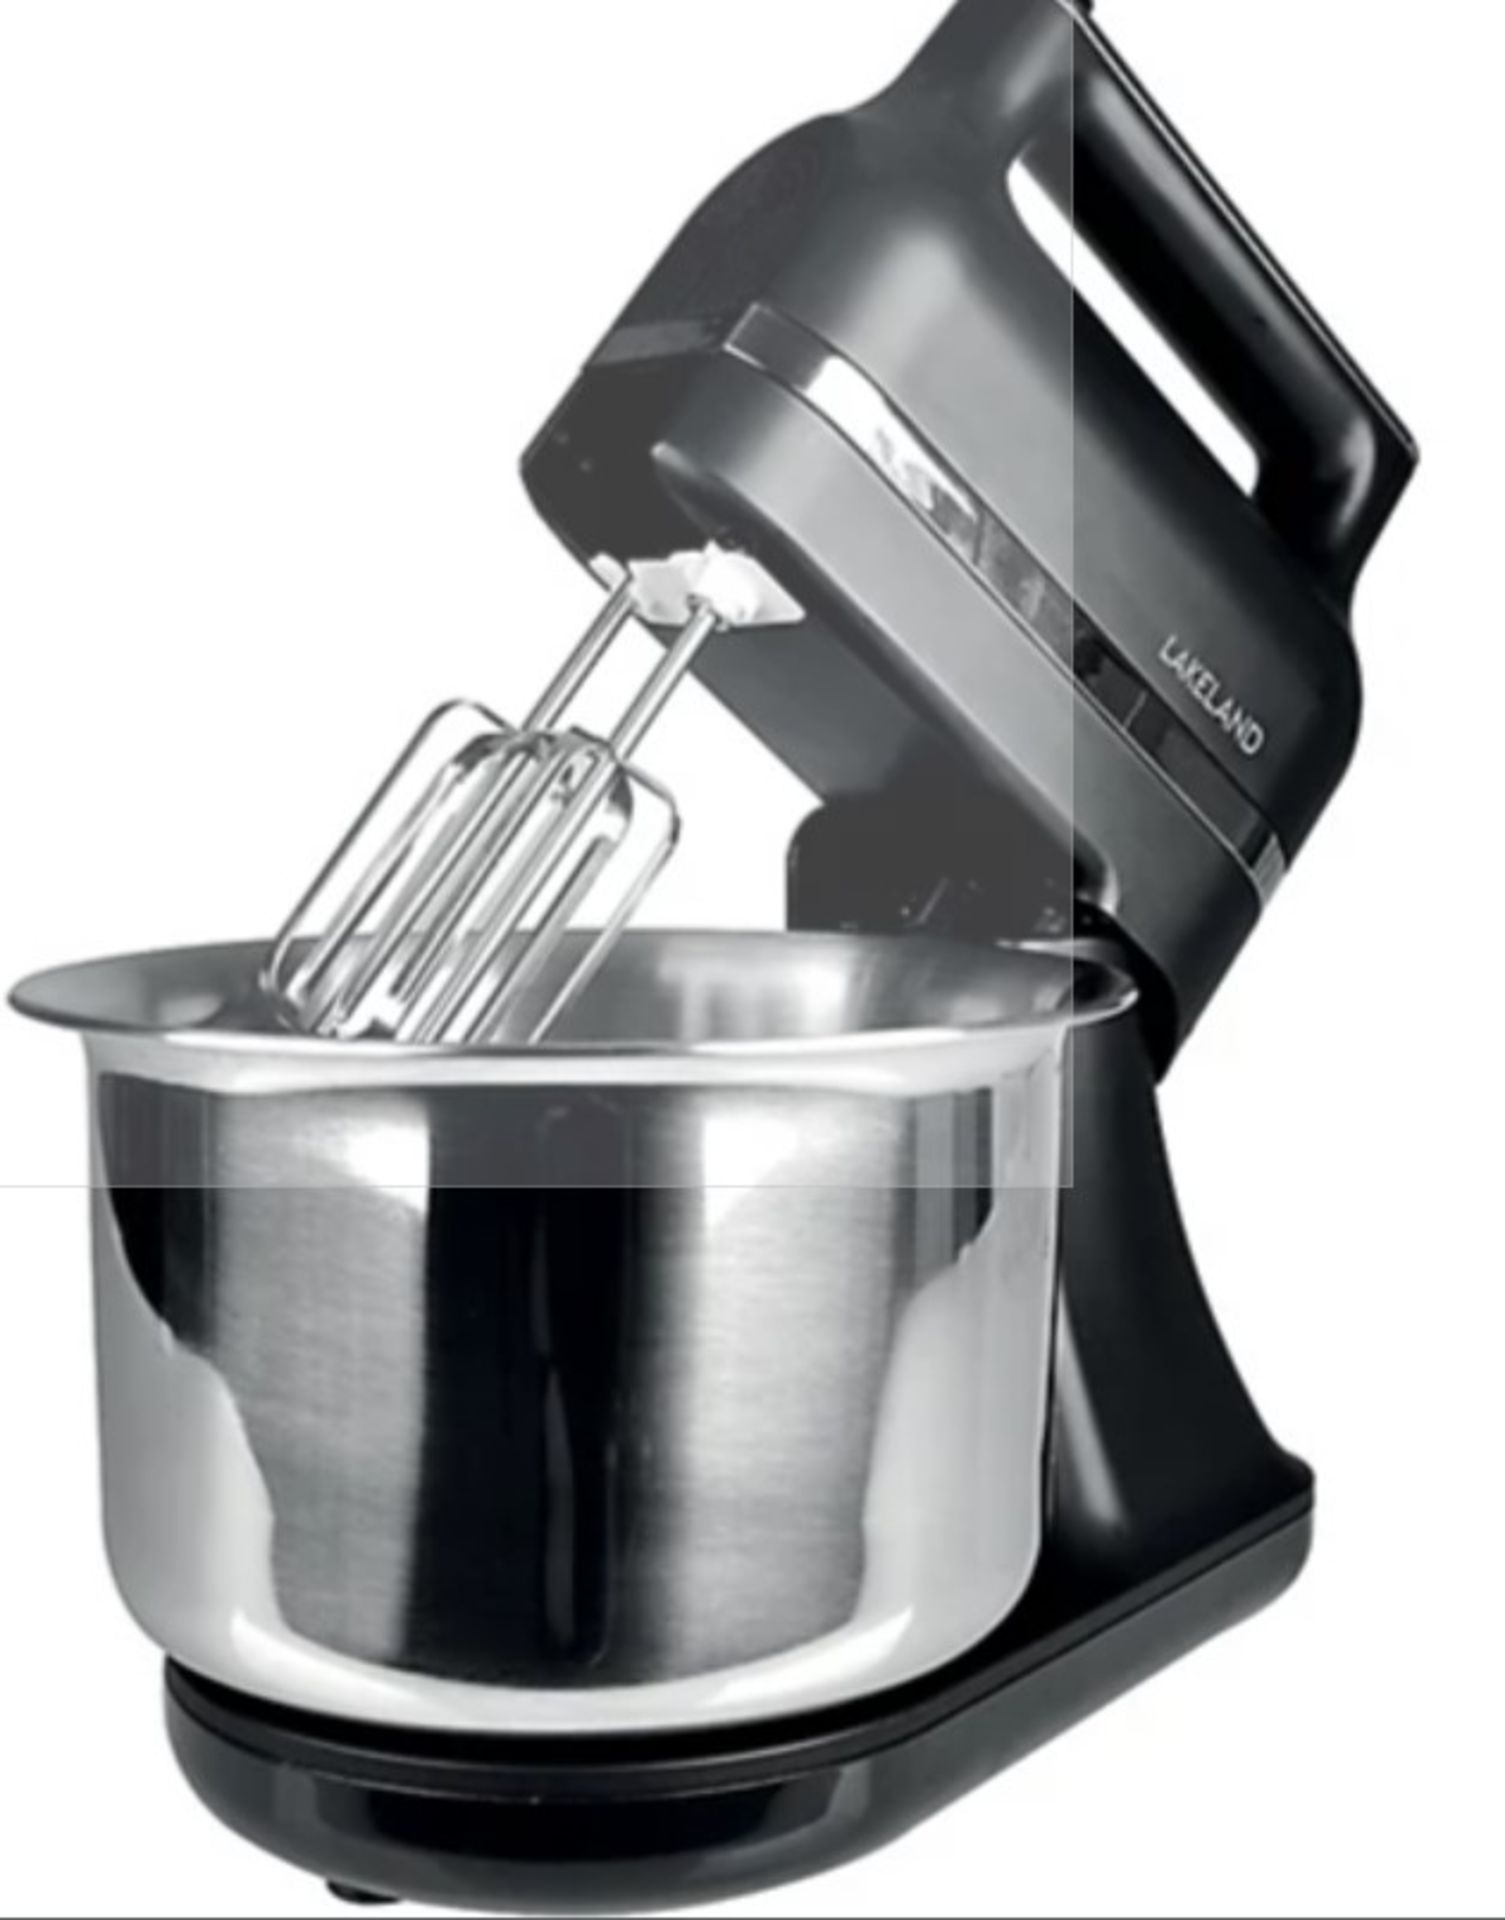 Lakeland 2-in-1 Hand and Stand Mixer Matt Black 3.5L. If, like us, you want a kitchen appliance that